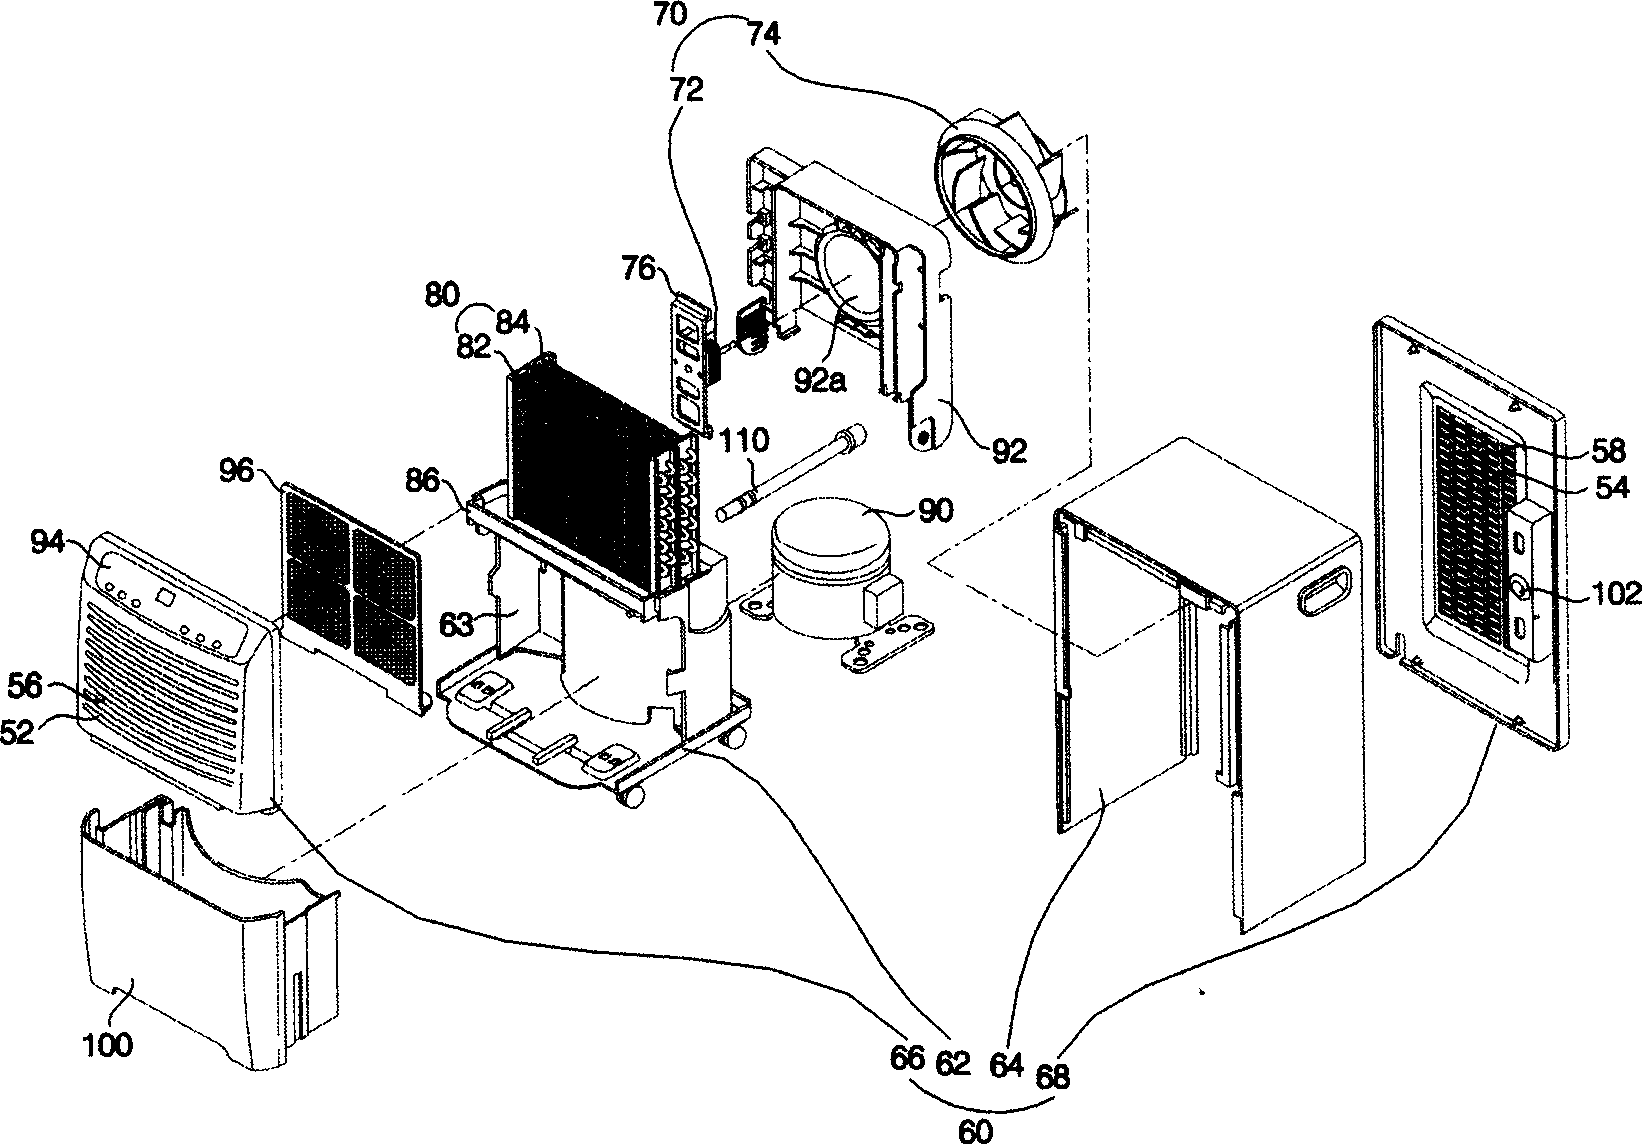 Drainage structure of dehumidifier